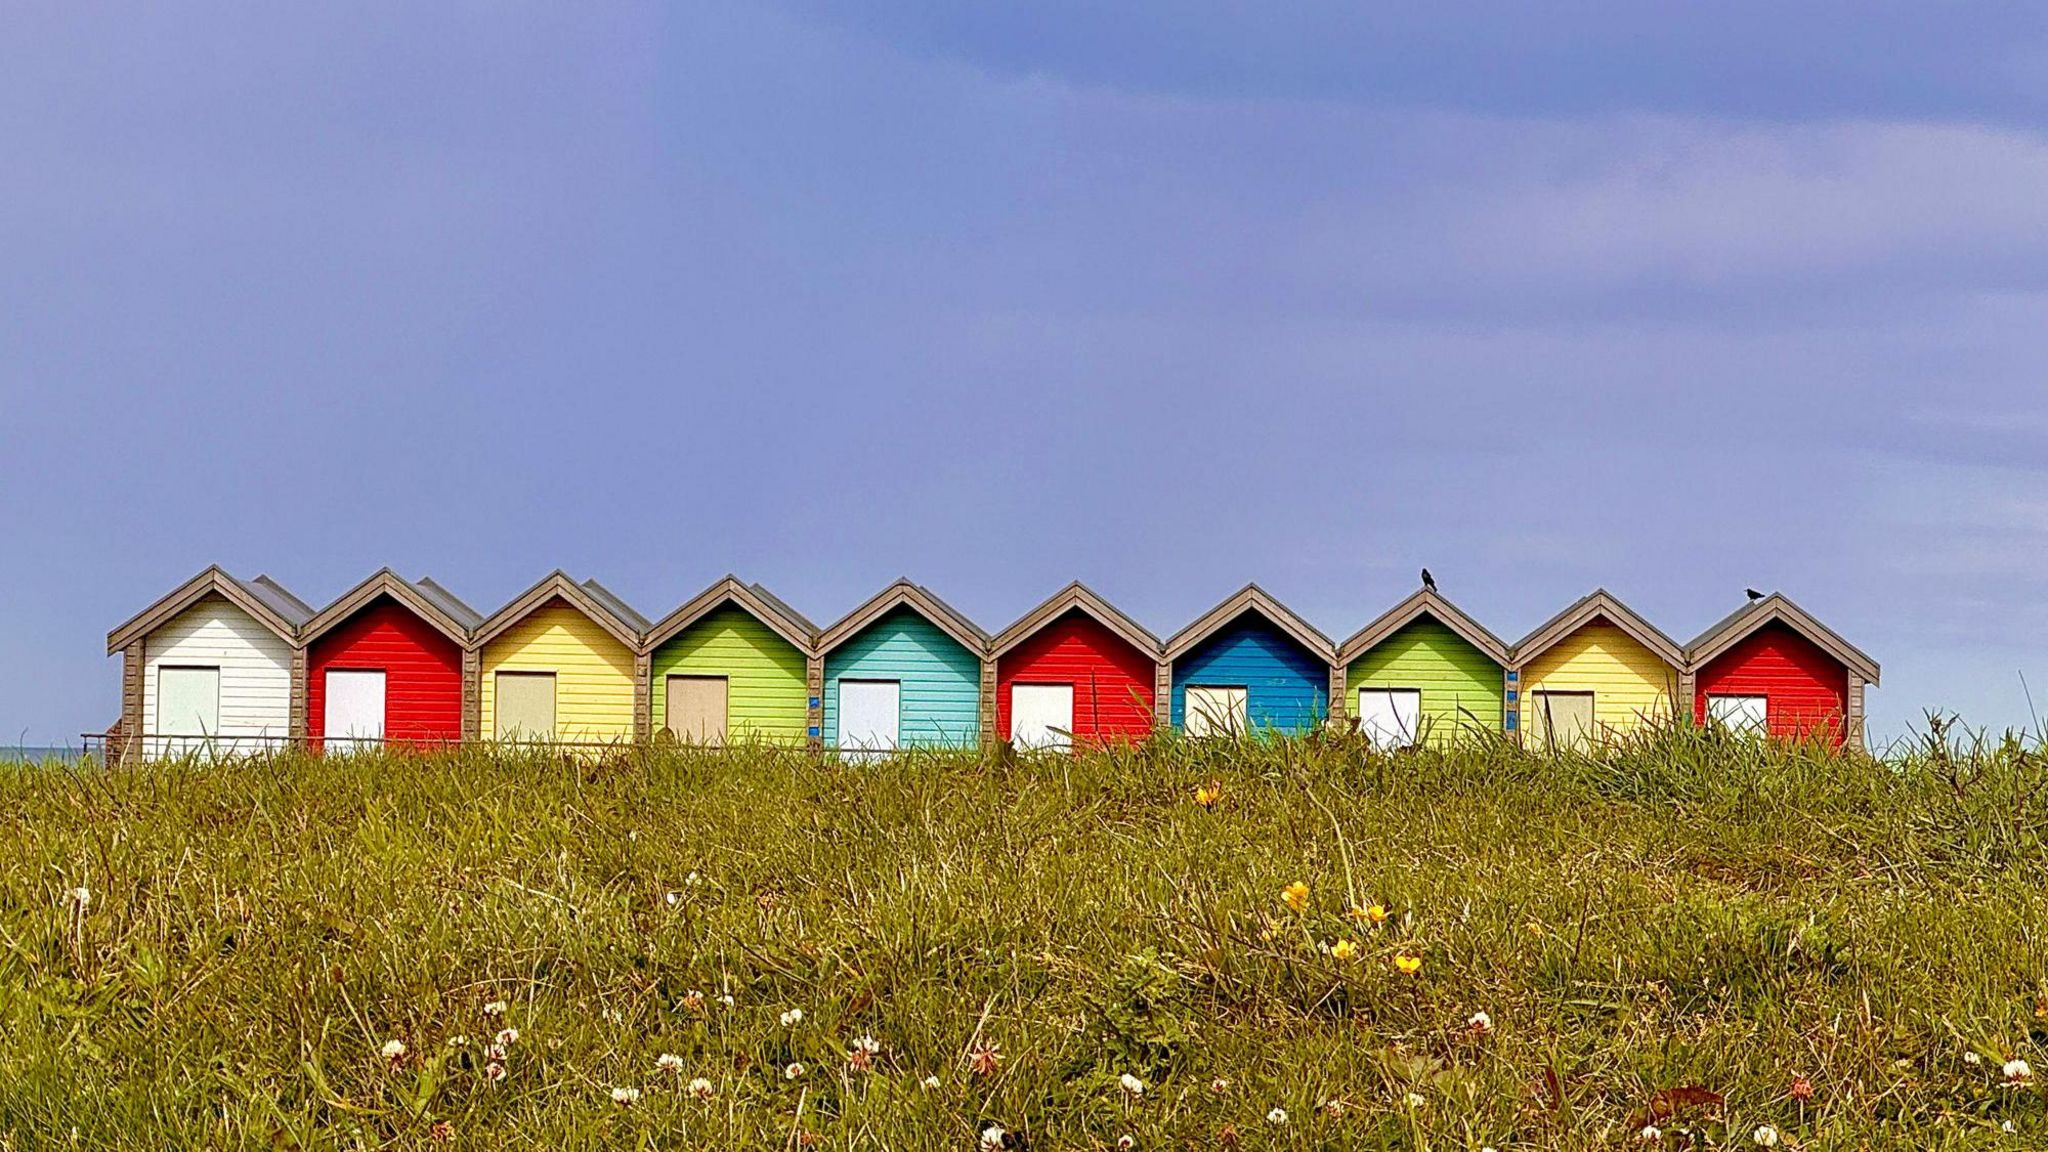 A row of yellow, green, red and blue beach huts in Blyth